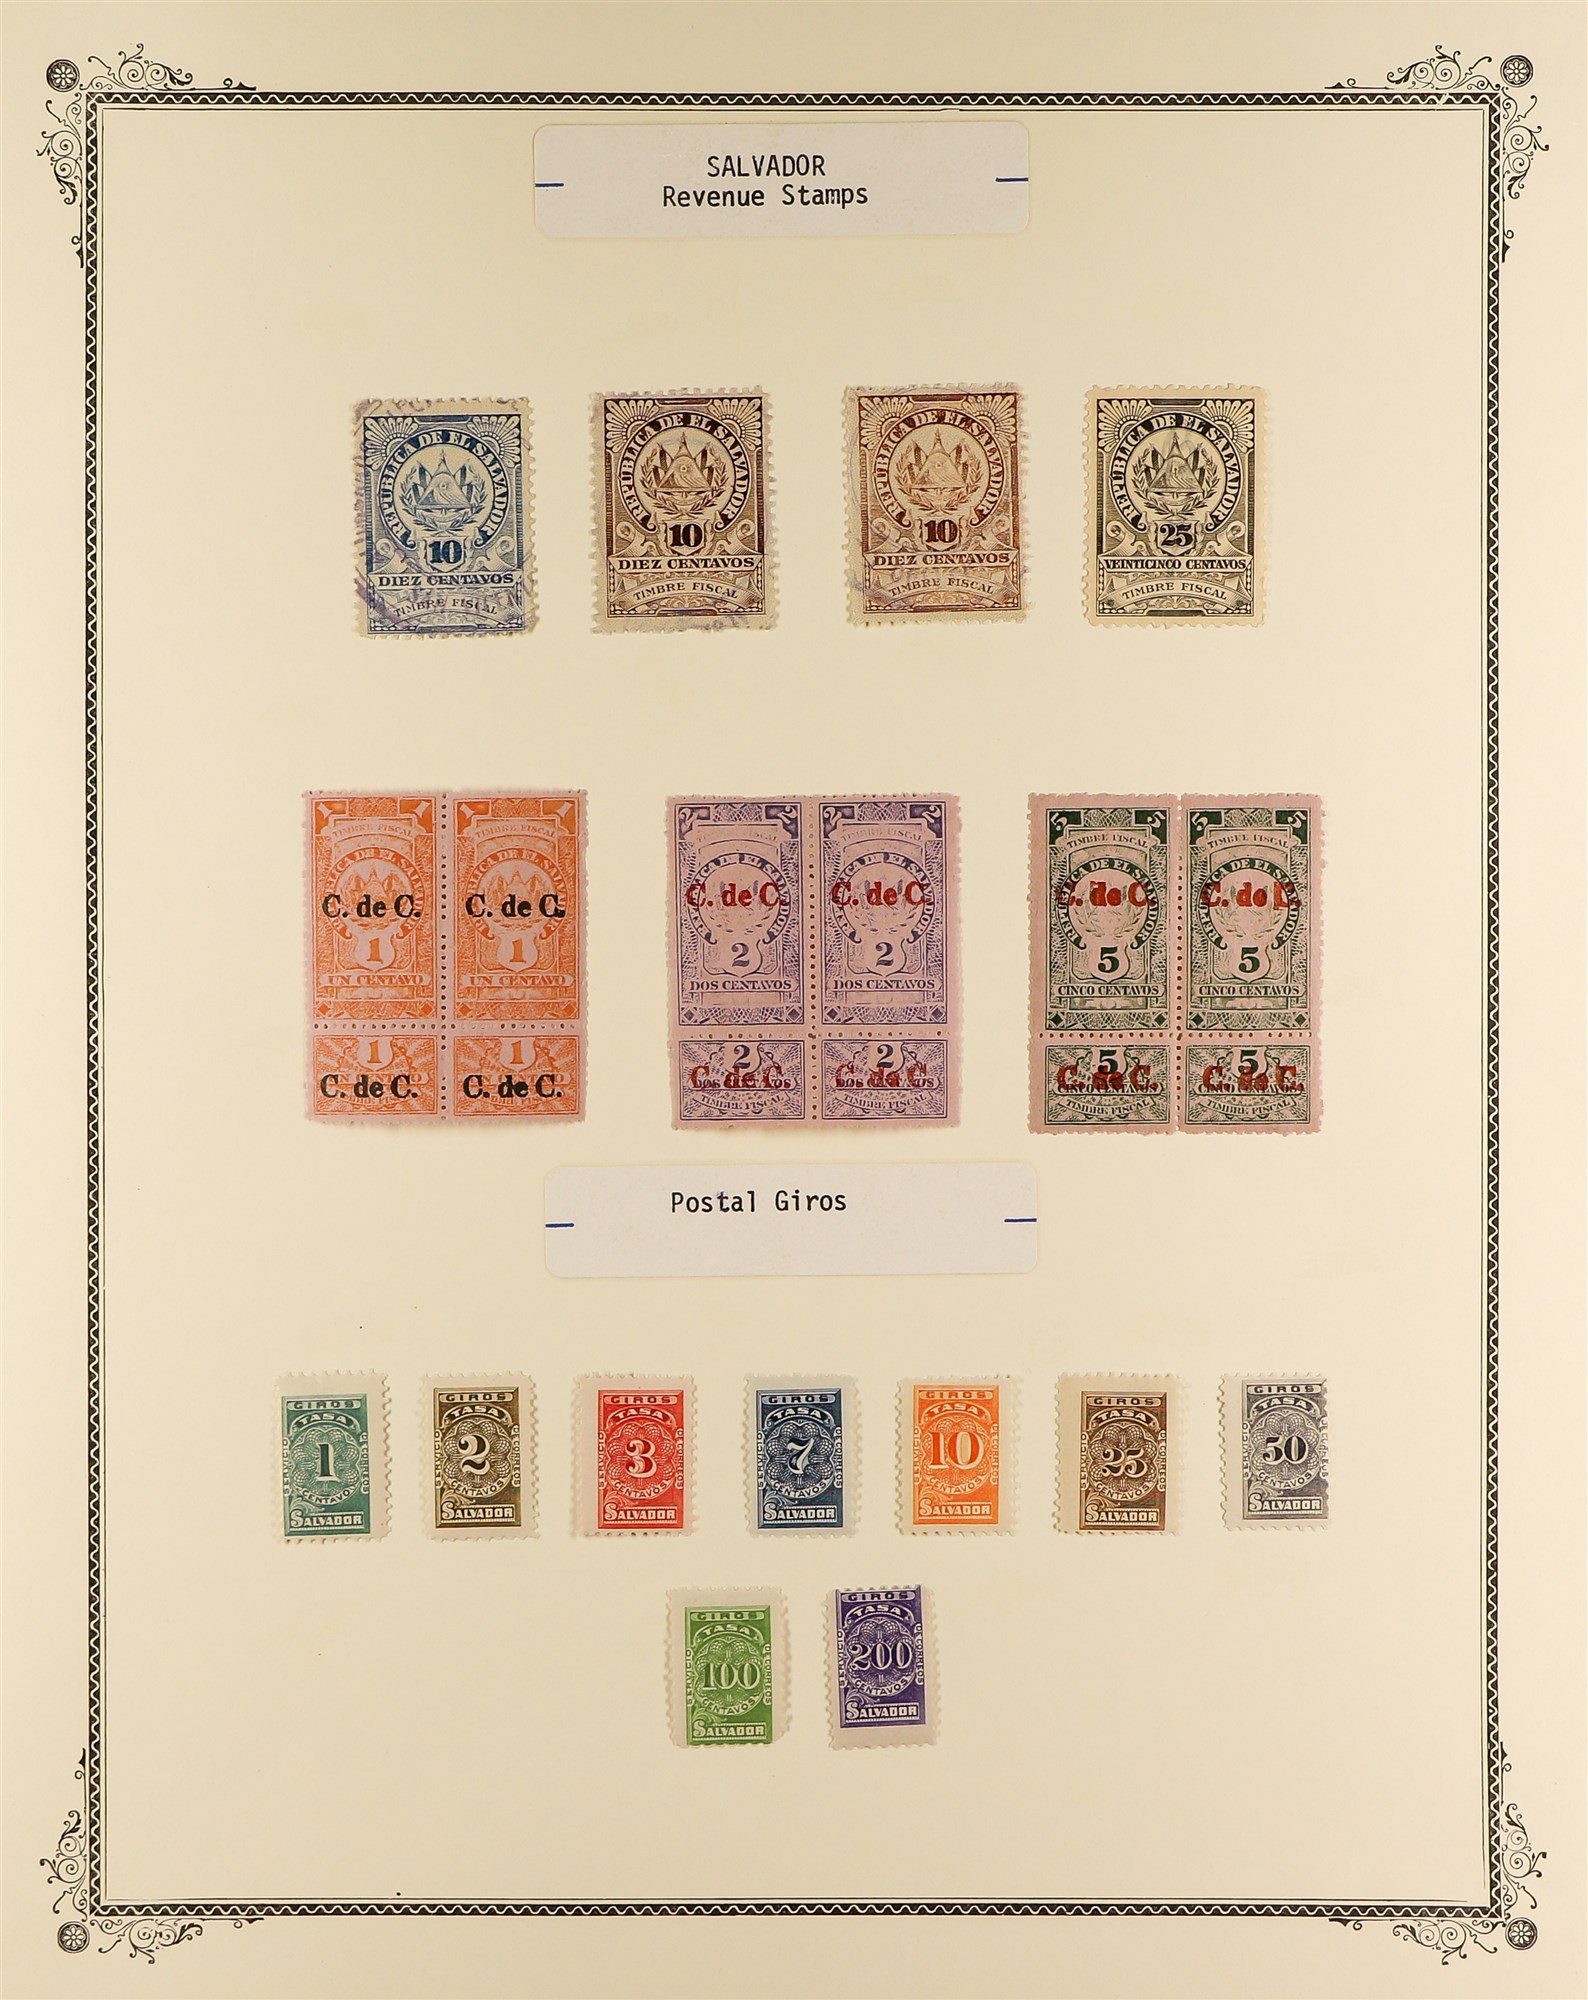 EL SALVADOR REVENUE STAMPS 1883 - 1925 mint & used collection of over 400 revenue stamps, on album - Image 27 of 27